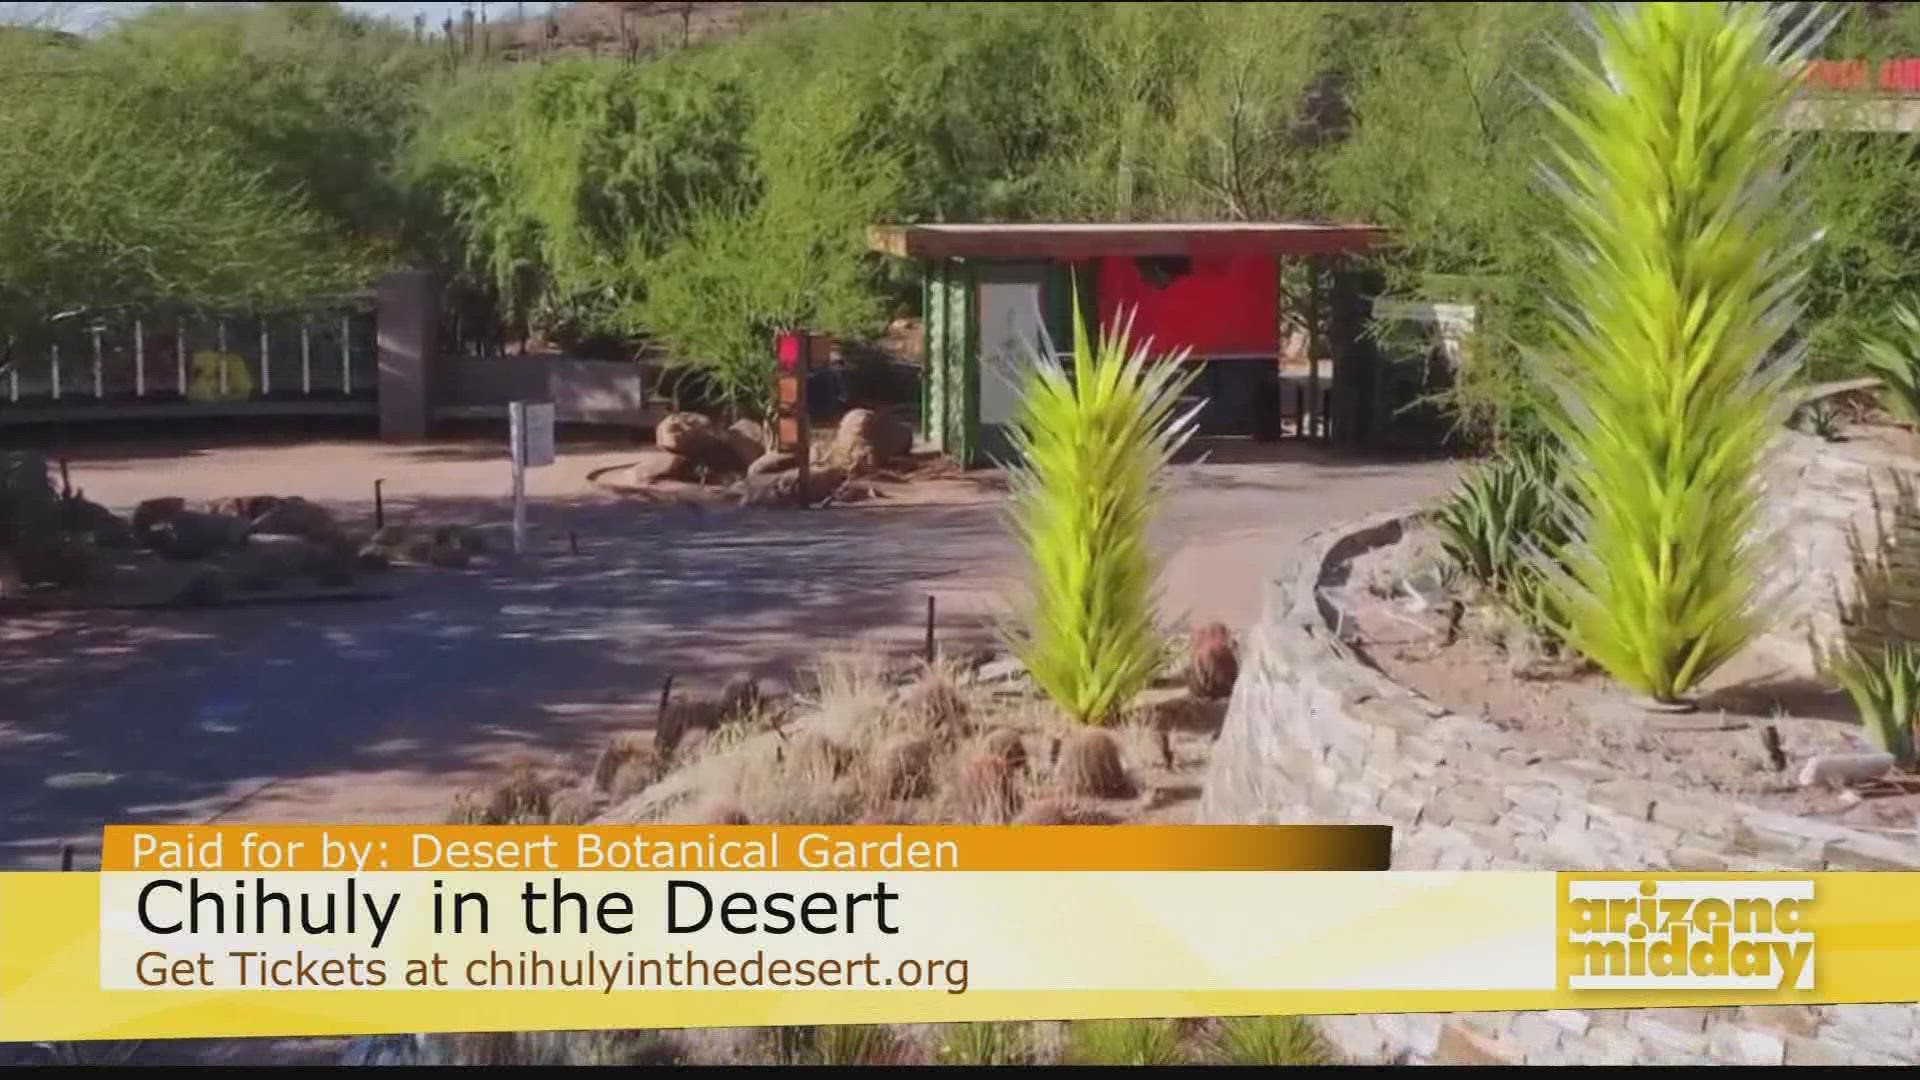 Lauren Warren & Niki Stewart share how are lovers can experience Chihuly in the Desert at the Desert Botanical Garden & Frank Lloyd Wright's Taliesin West